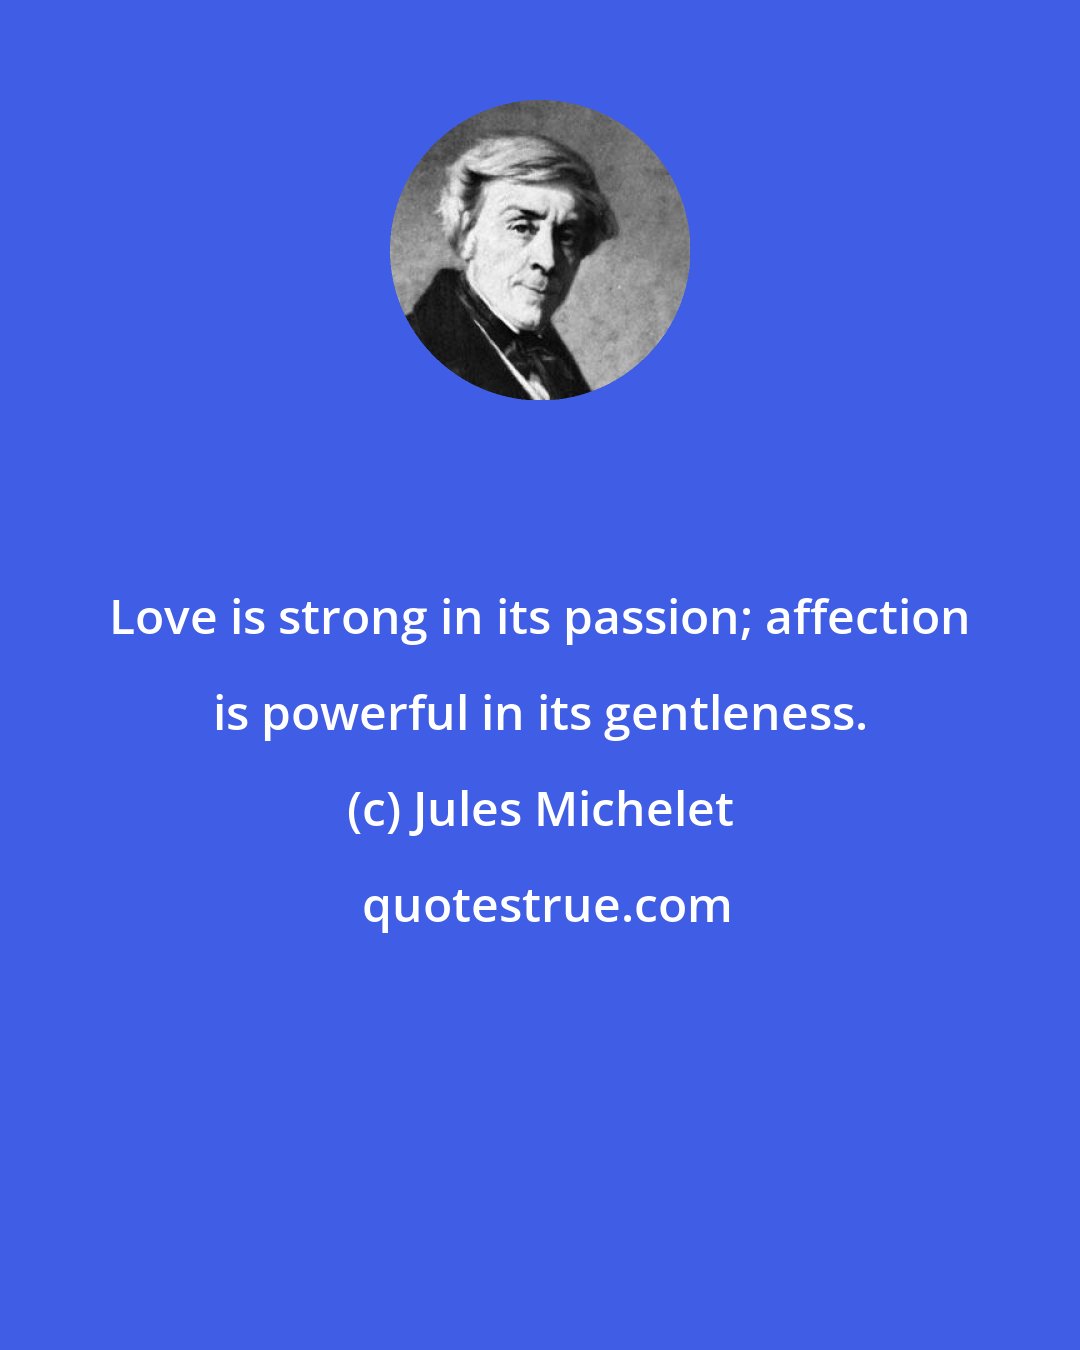 Jules Michelet: Love is strong in its passion; affection is powerful in its gentleness.